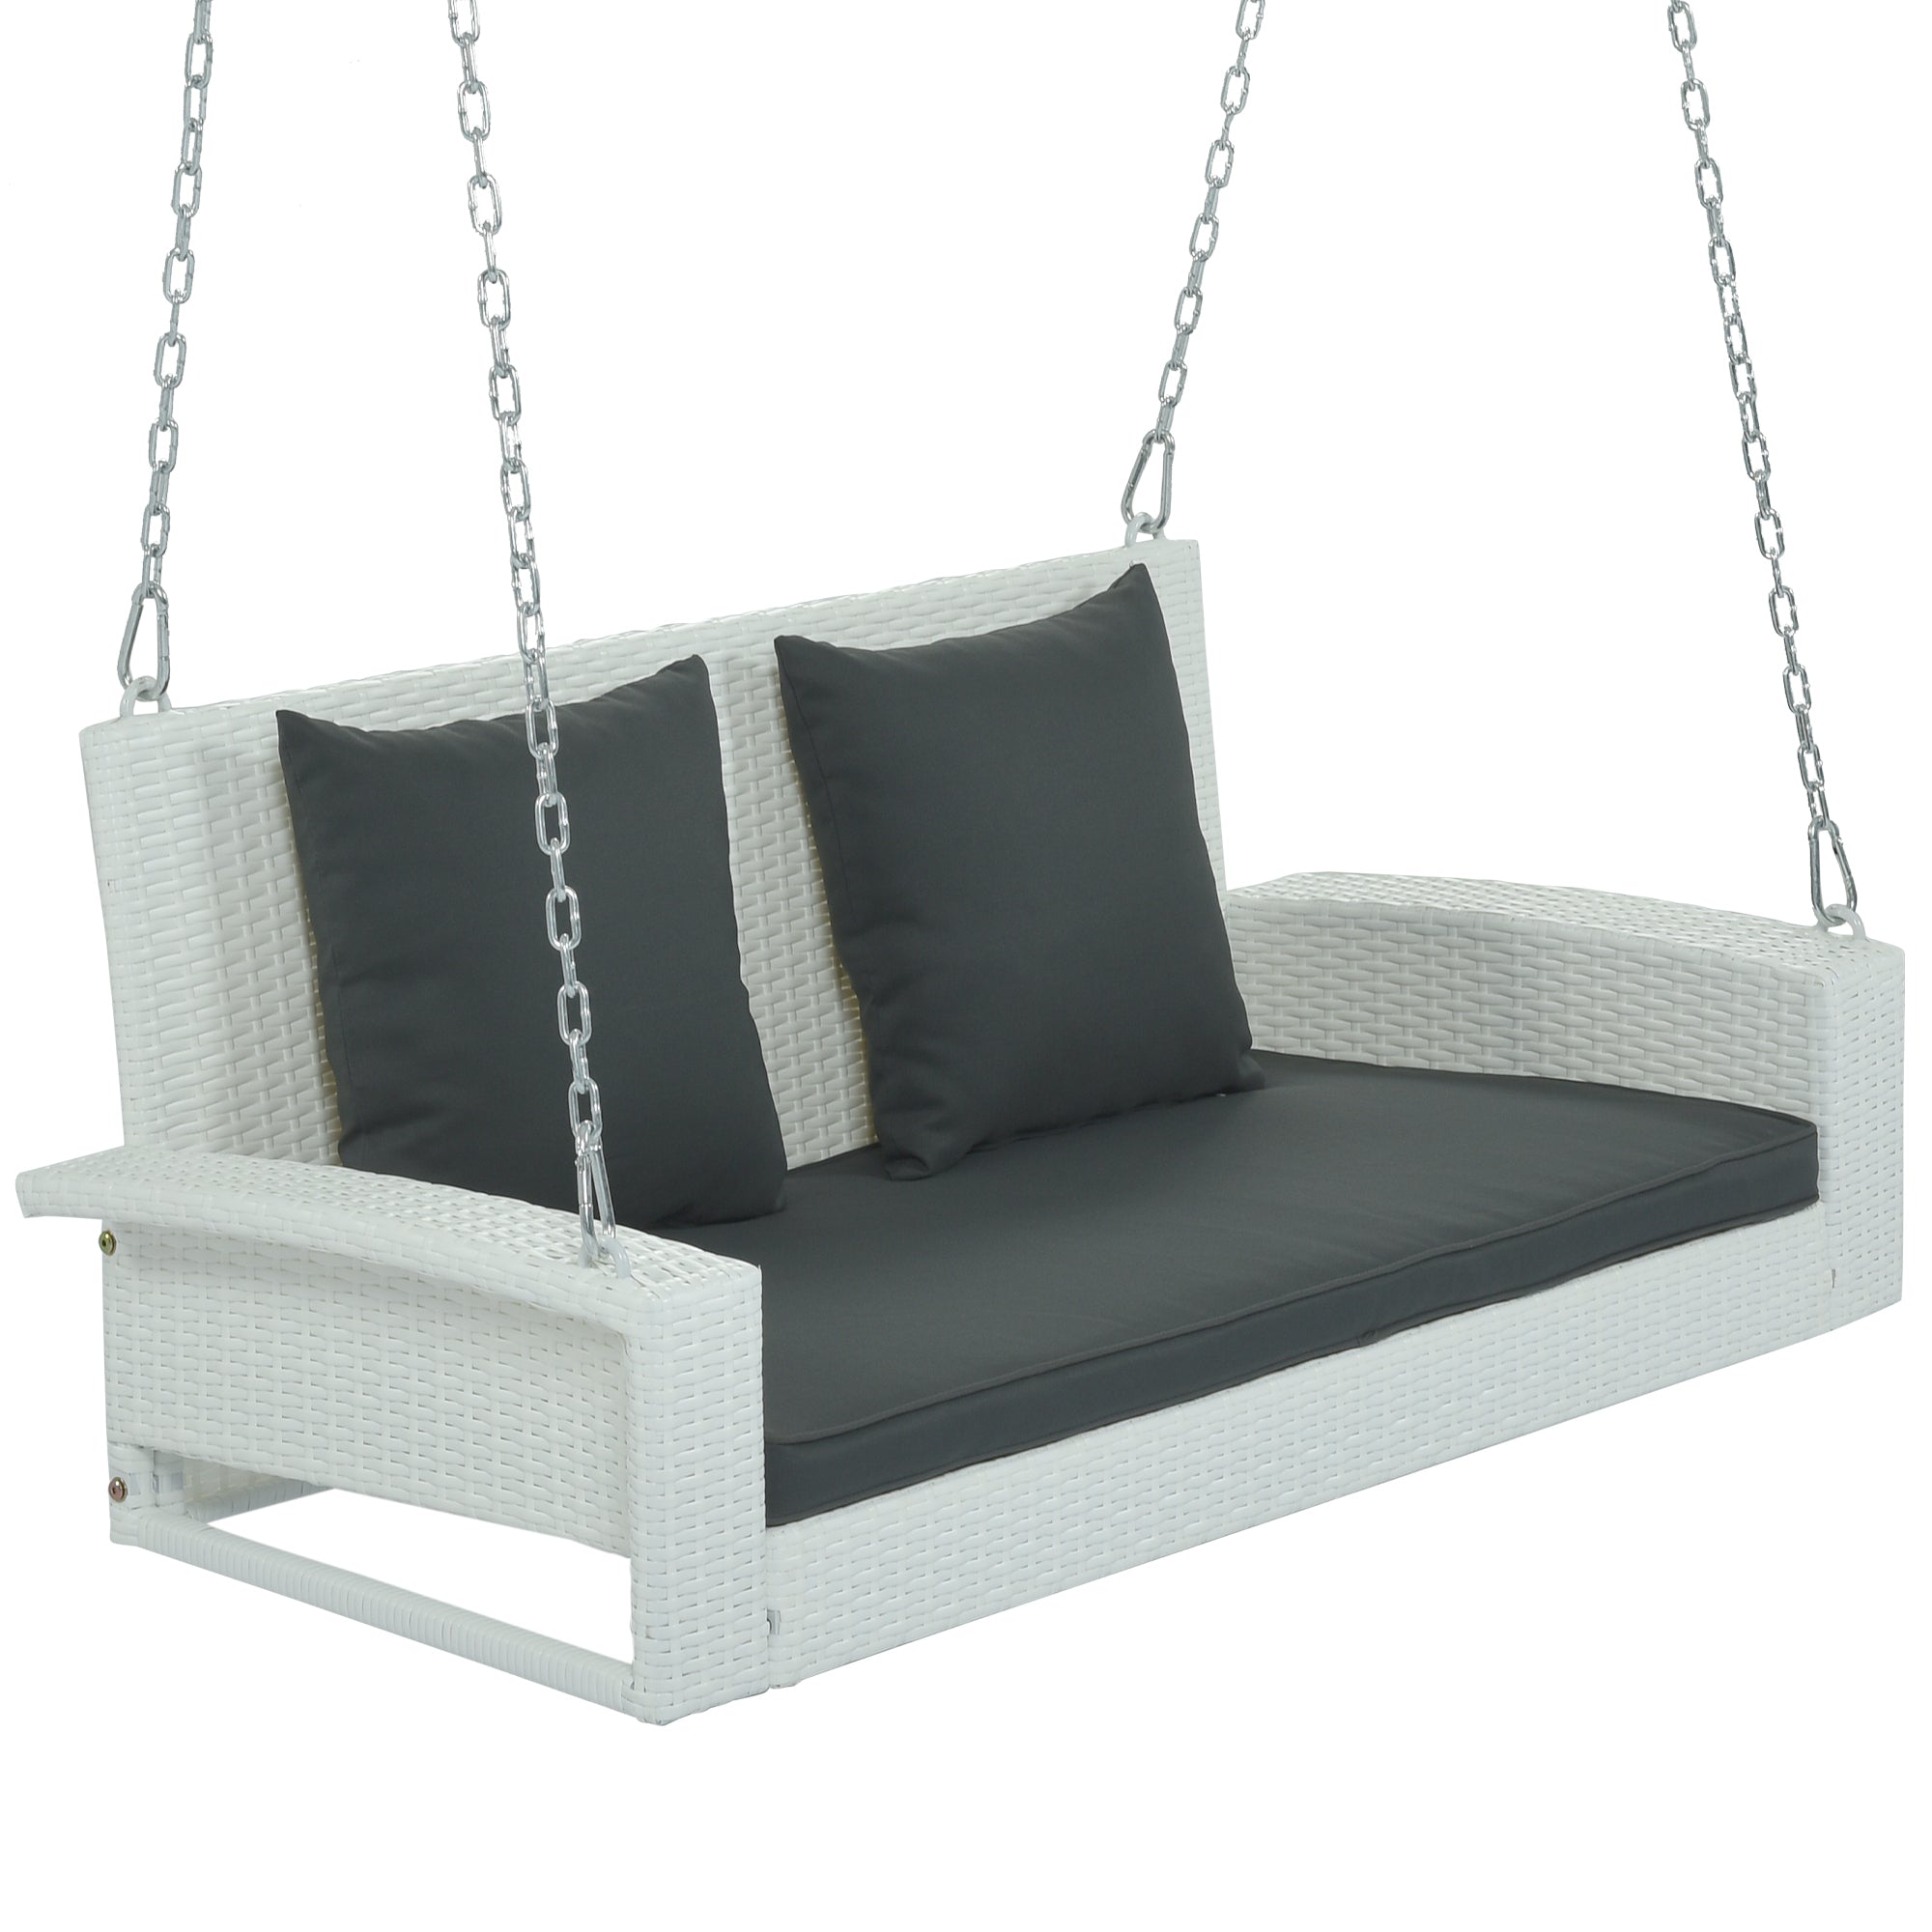 2-Person Wicker Hanging Porch Swing with Chains, Cushion, Pillow, Rattan Swing Bench for Garden, Backyard, Pond. (White Wicker, Gray Cushion)